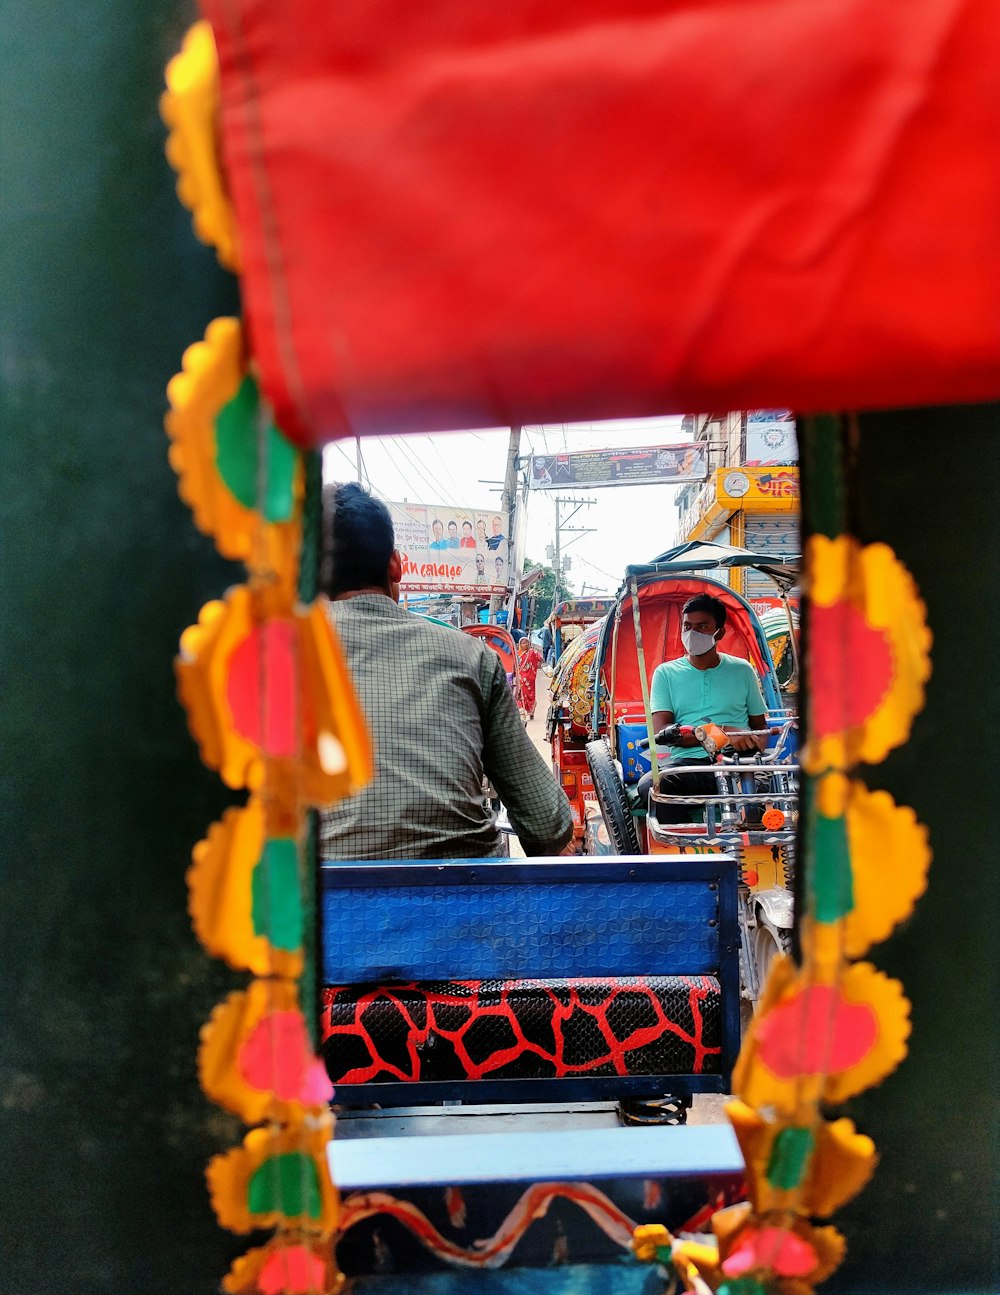 a man and a woman are riding on a cart